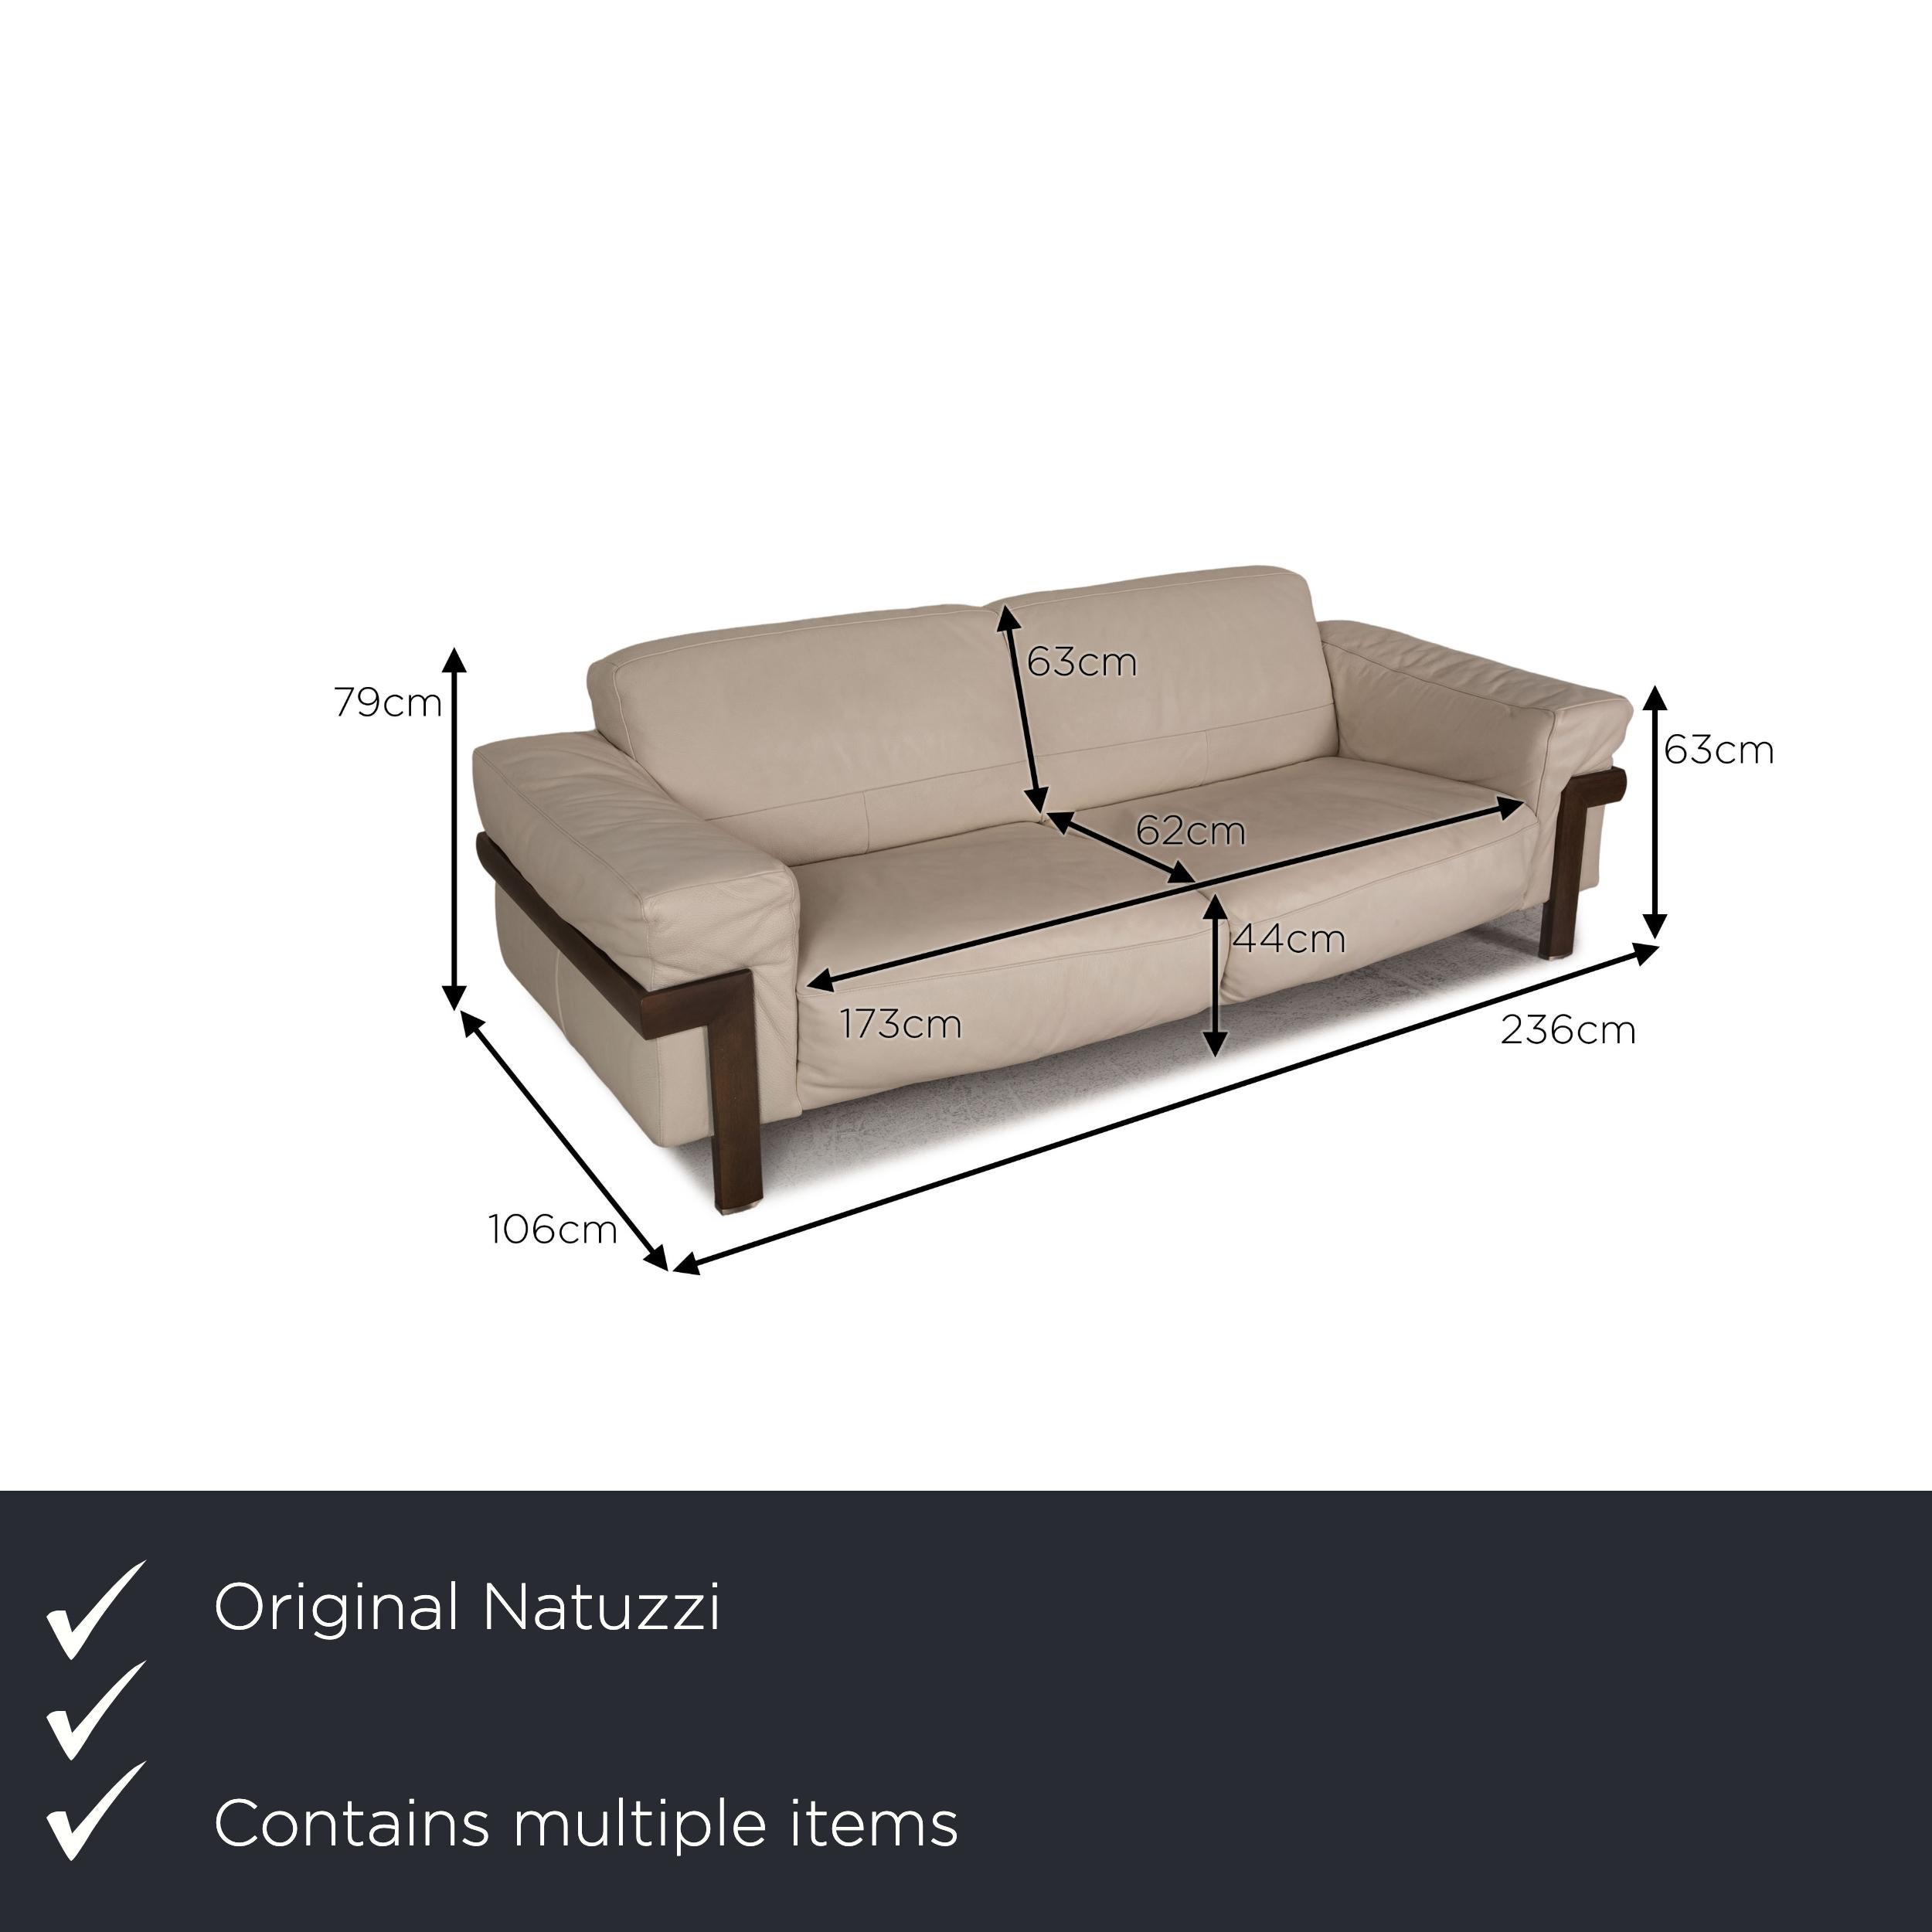 We present to you a Natuzzi leather sofa set cream 2x two-seater couch.

Product measurements in centimeters:

Measures: depth: 106
width: 236
height: 79
seat height: 44
rest height: 63
seat depth: 62
seat width: 173
back height: 63.

 